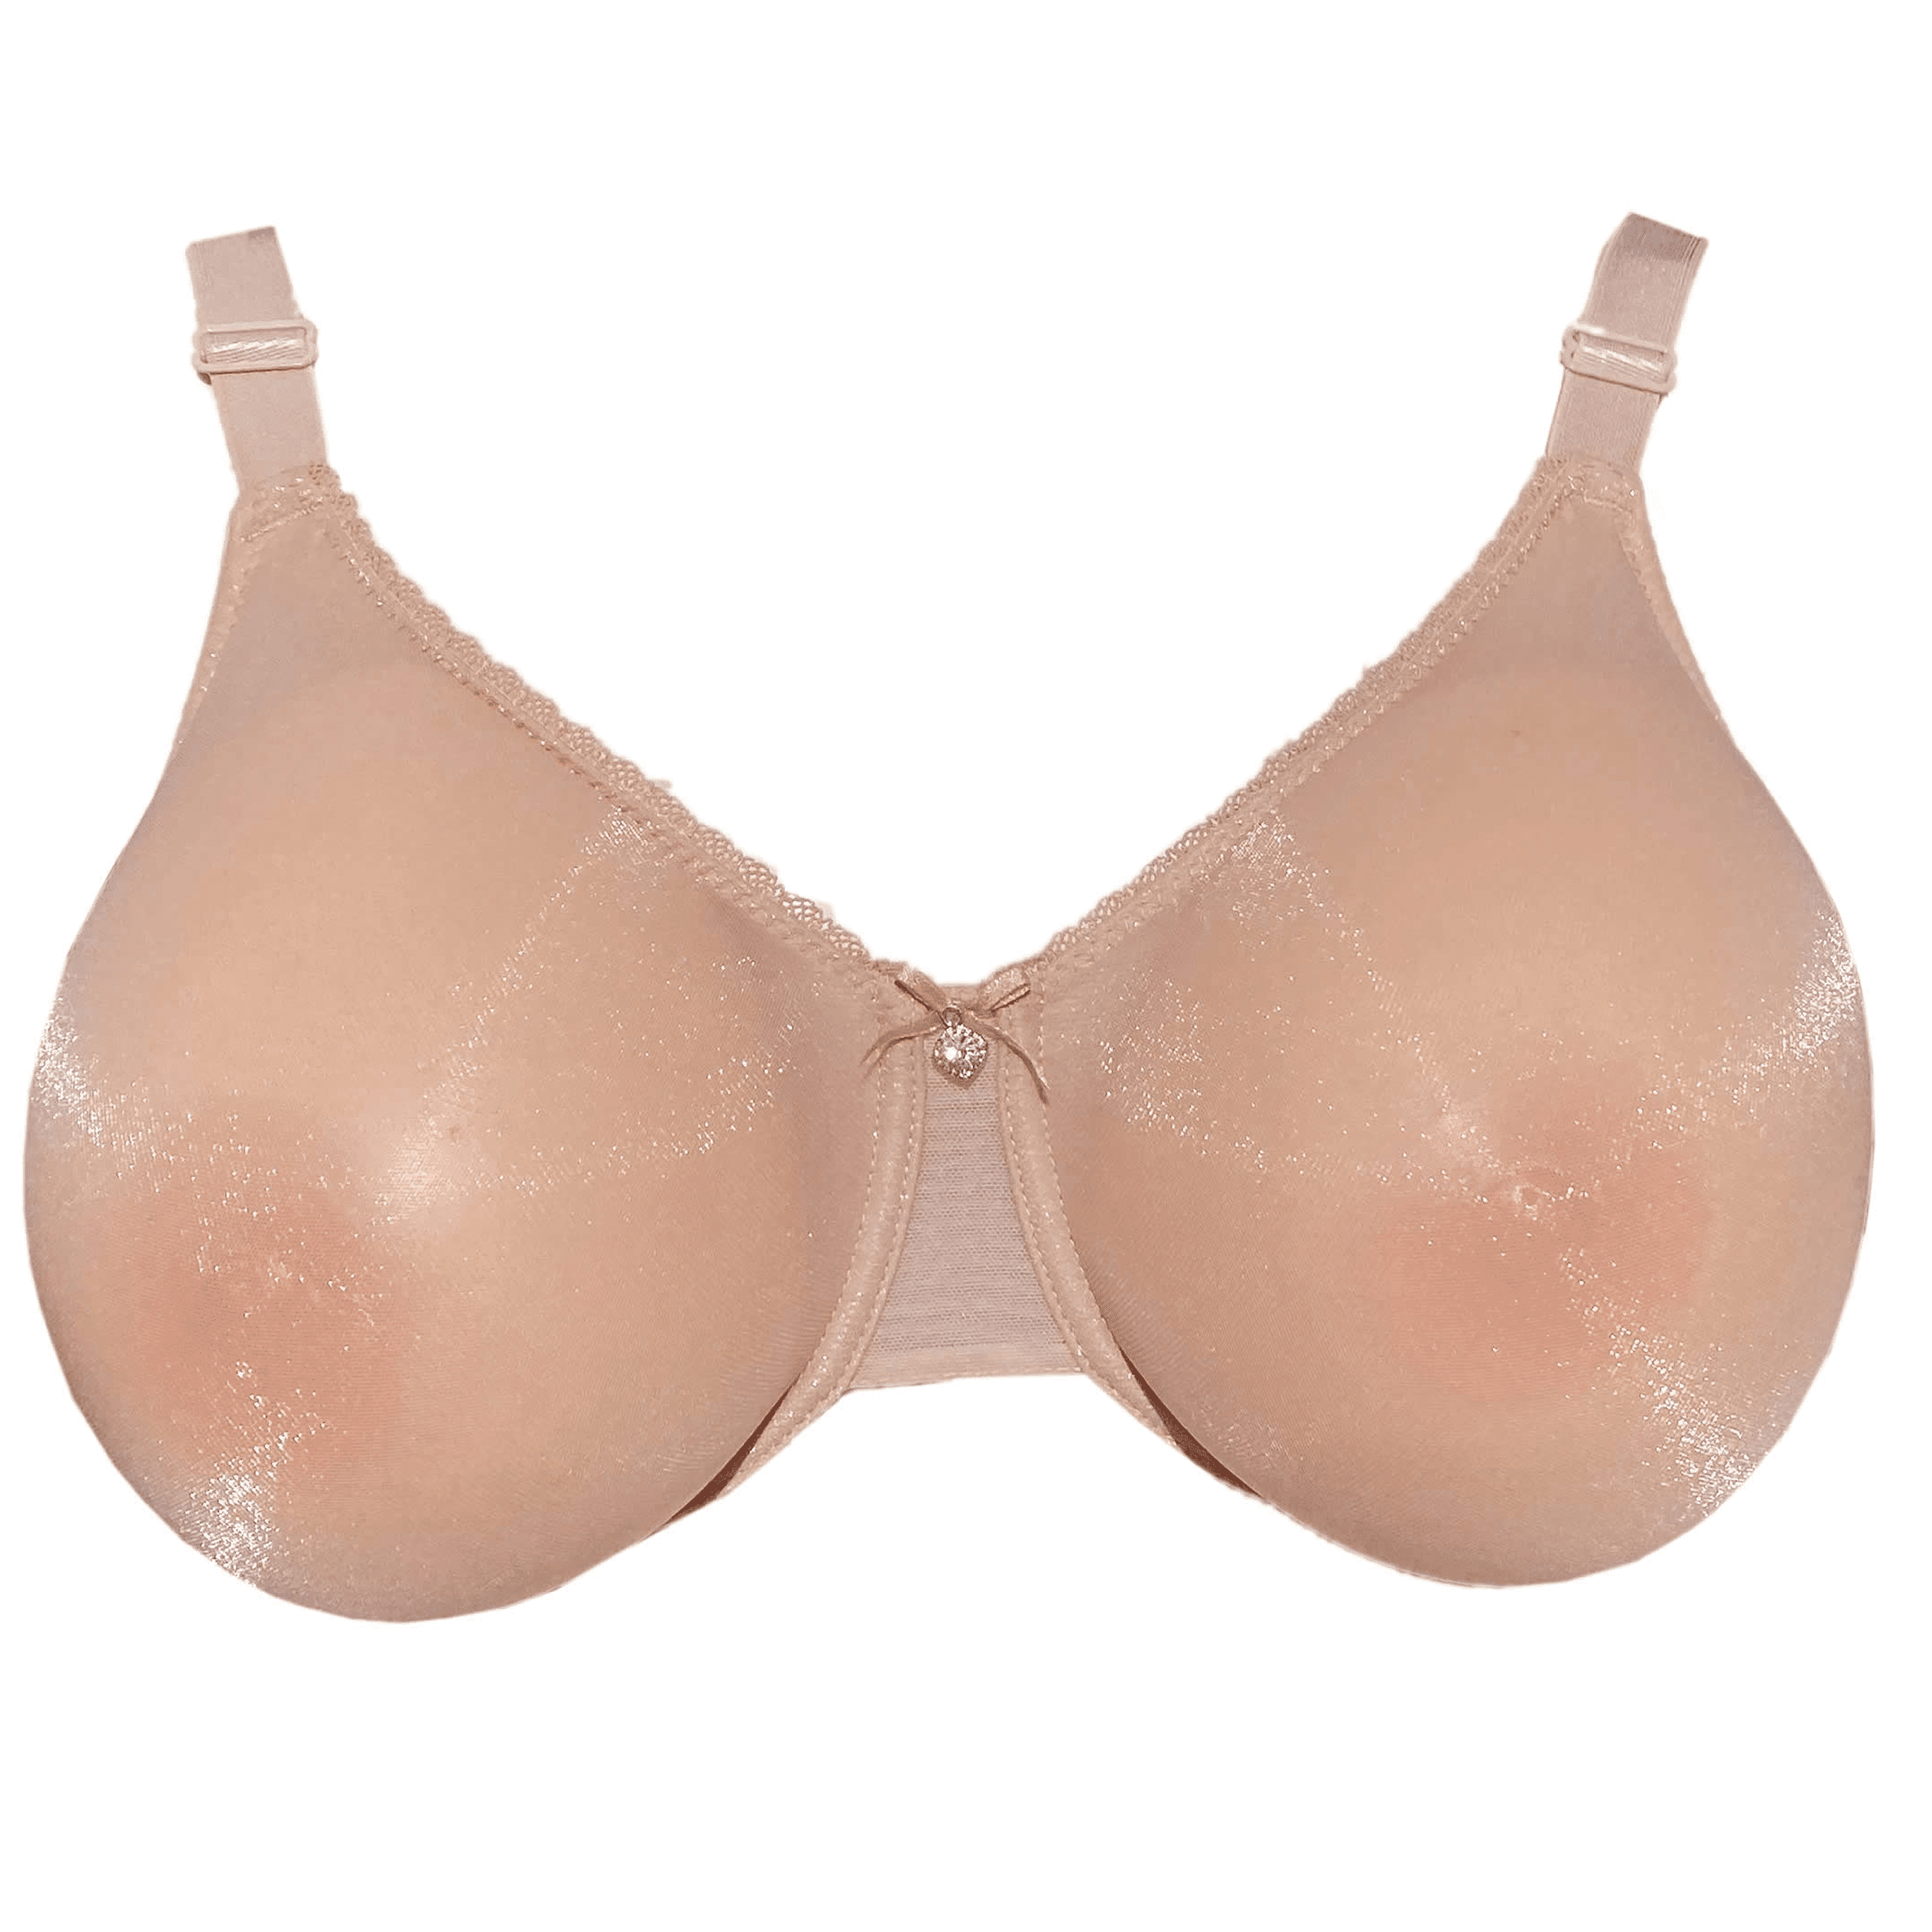 BIMEI See Through Bra CD Mastectomy Lingerie Bra Silicone Breast Forms Prosthesis  Pocket Bra with Steel Ring 9008,Beige,36C 